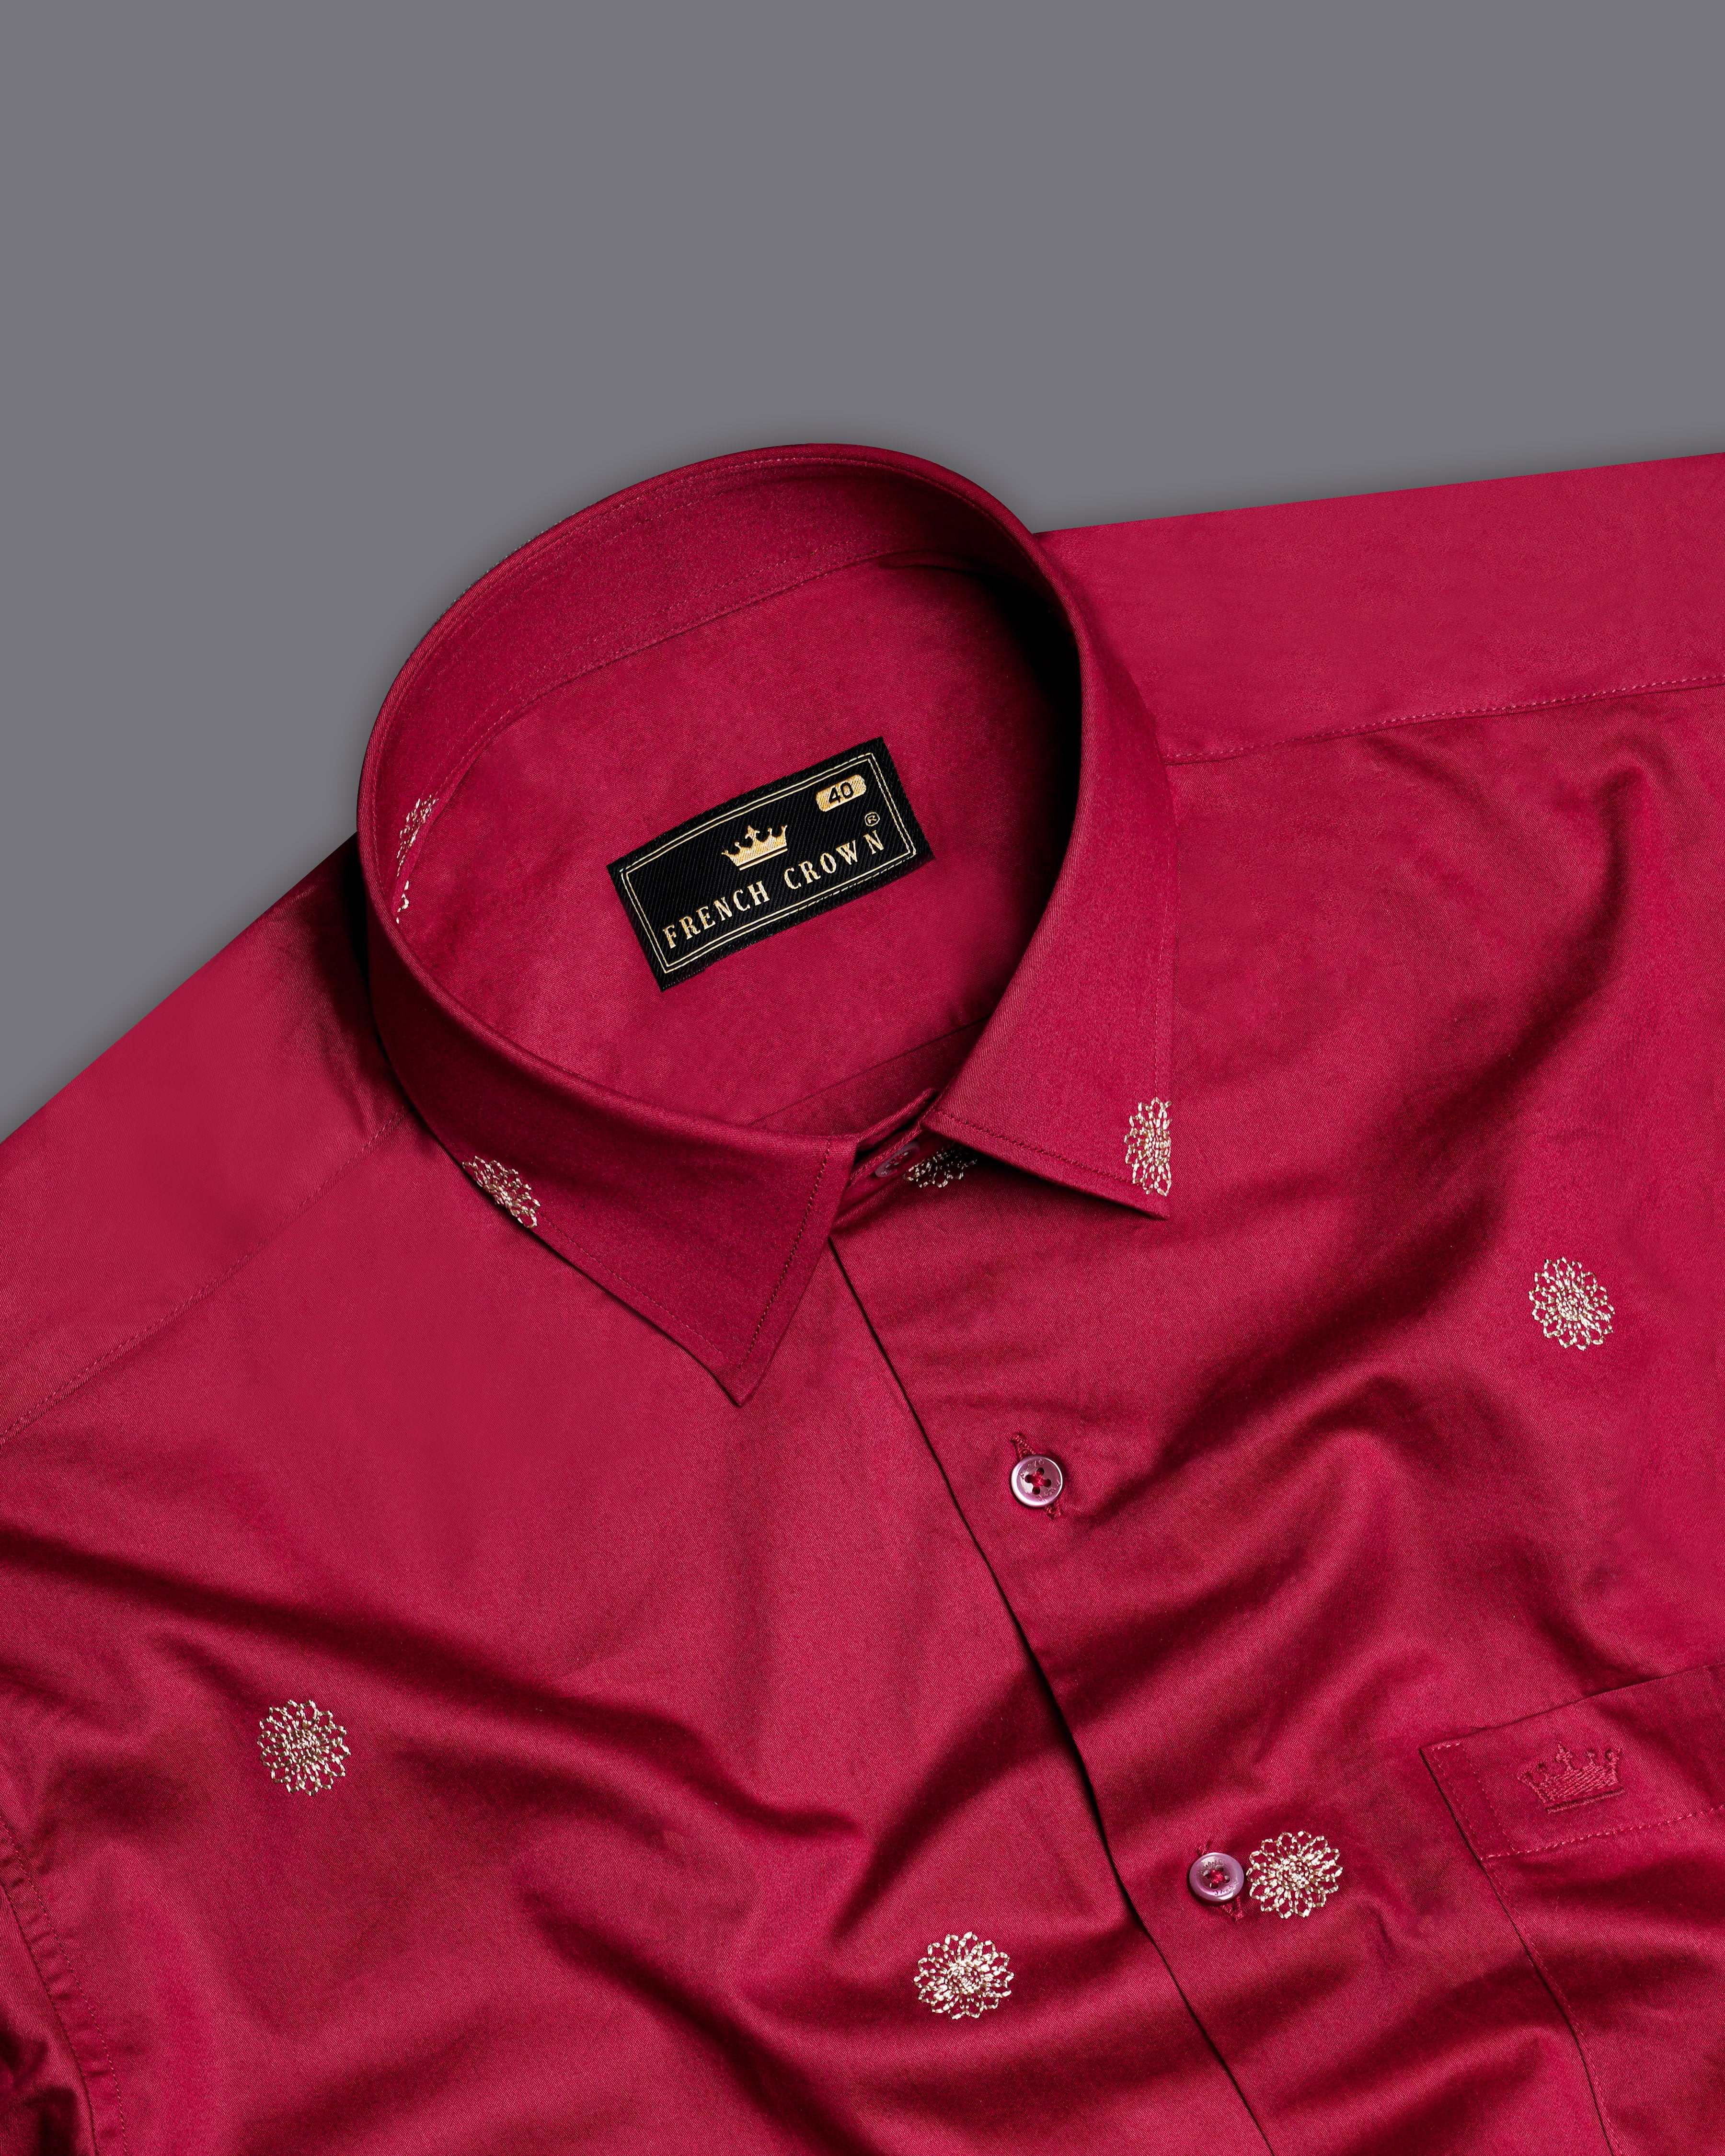 Mulberry Red with Negroni Cream Embroidered Super Soft Premium Cotton Shirt 9863-MN-38, 9863-MN-H-38, 9863-MN-39, 9863-MN-H-39, 9863-MN-40, 9863-MN-H-40, 9863-MN-42, 9863-MN-H-42, 9863-MN-44, 9863-MN-H-44, 9863-MN-46, 9863-MN-H-46, 9863-MN-48, 9863-MN-H-48, 9863-MN-50, 9863-MN-H-50, 9863-MN-52, 9863-MN-H-52